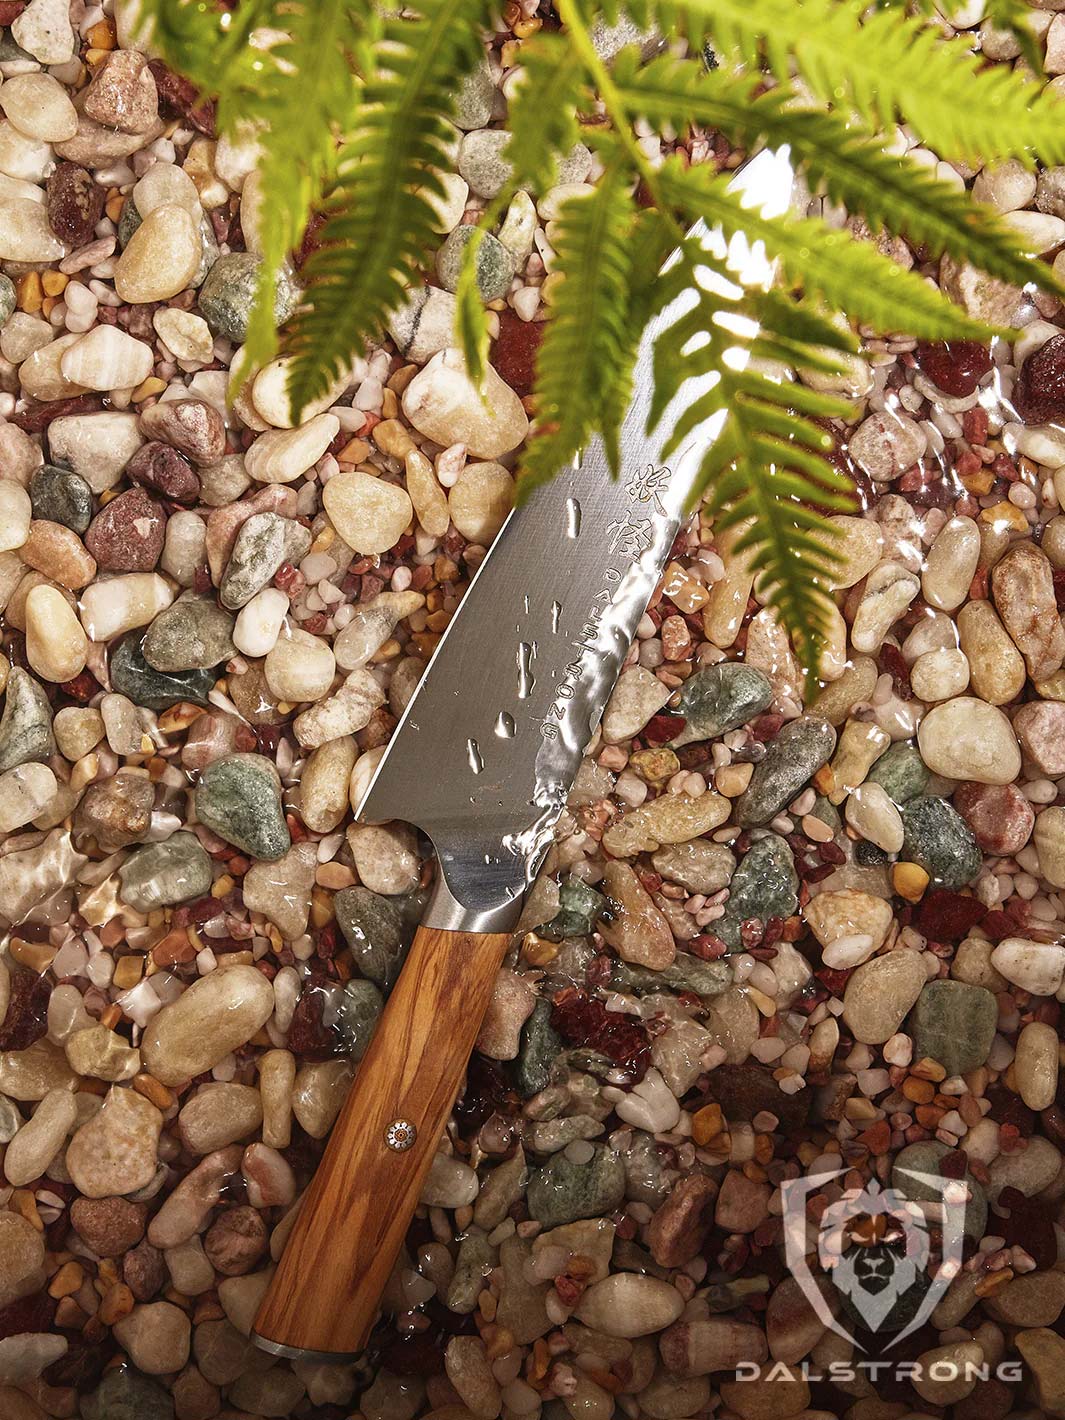 8” Chef Knife by Nomad